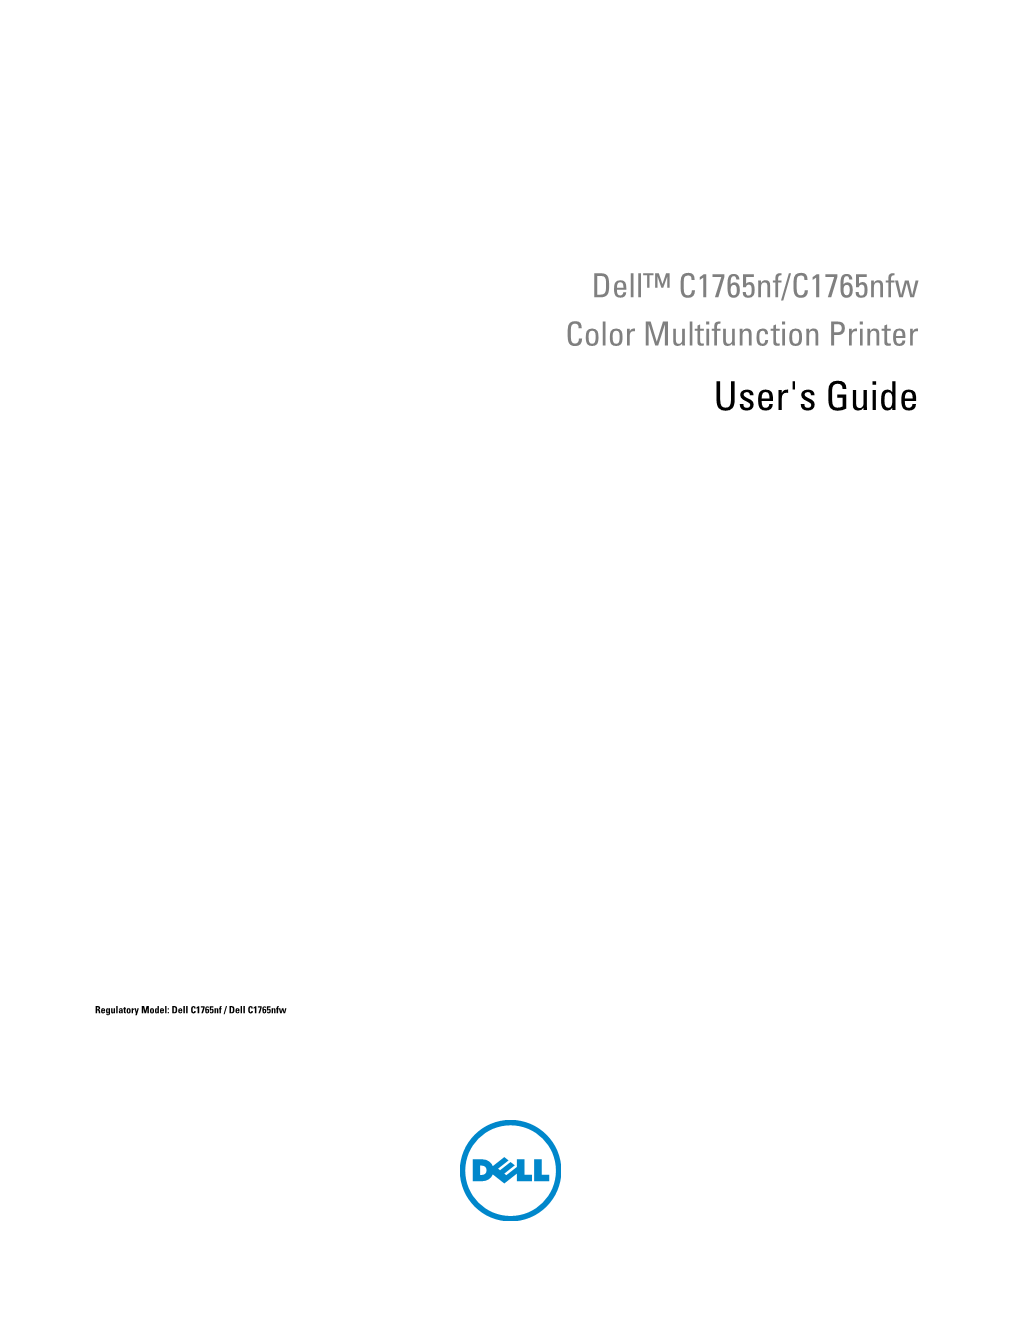 Dell C1765nfw User's Guide